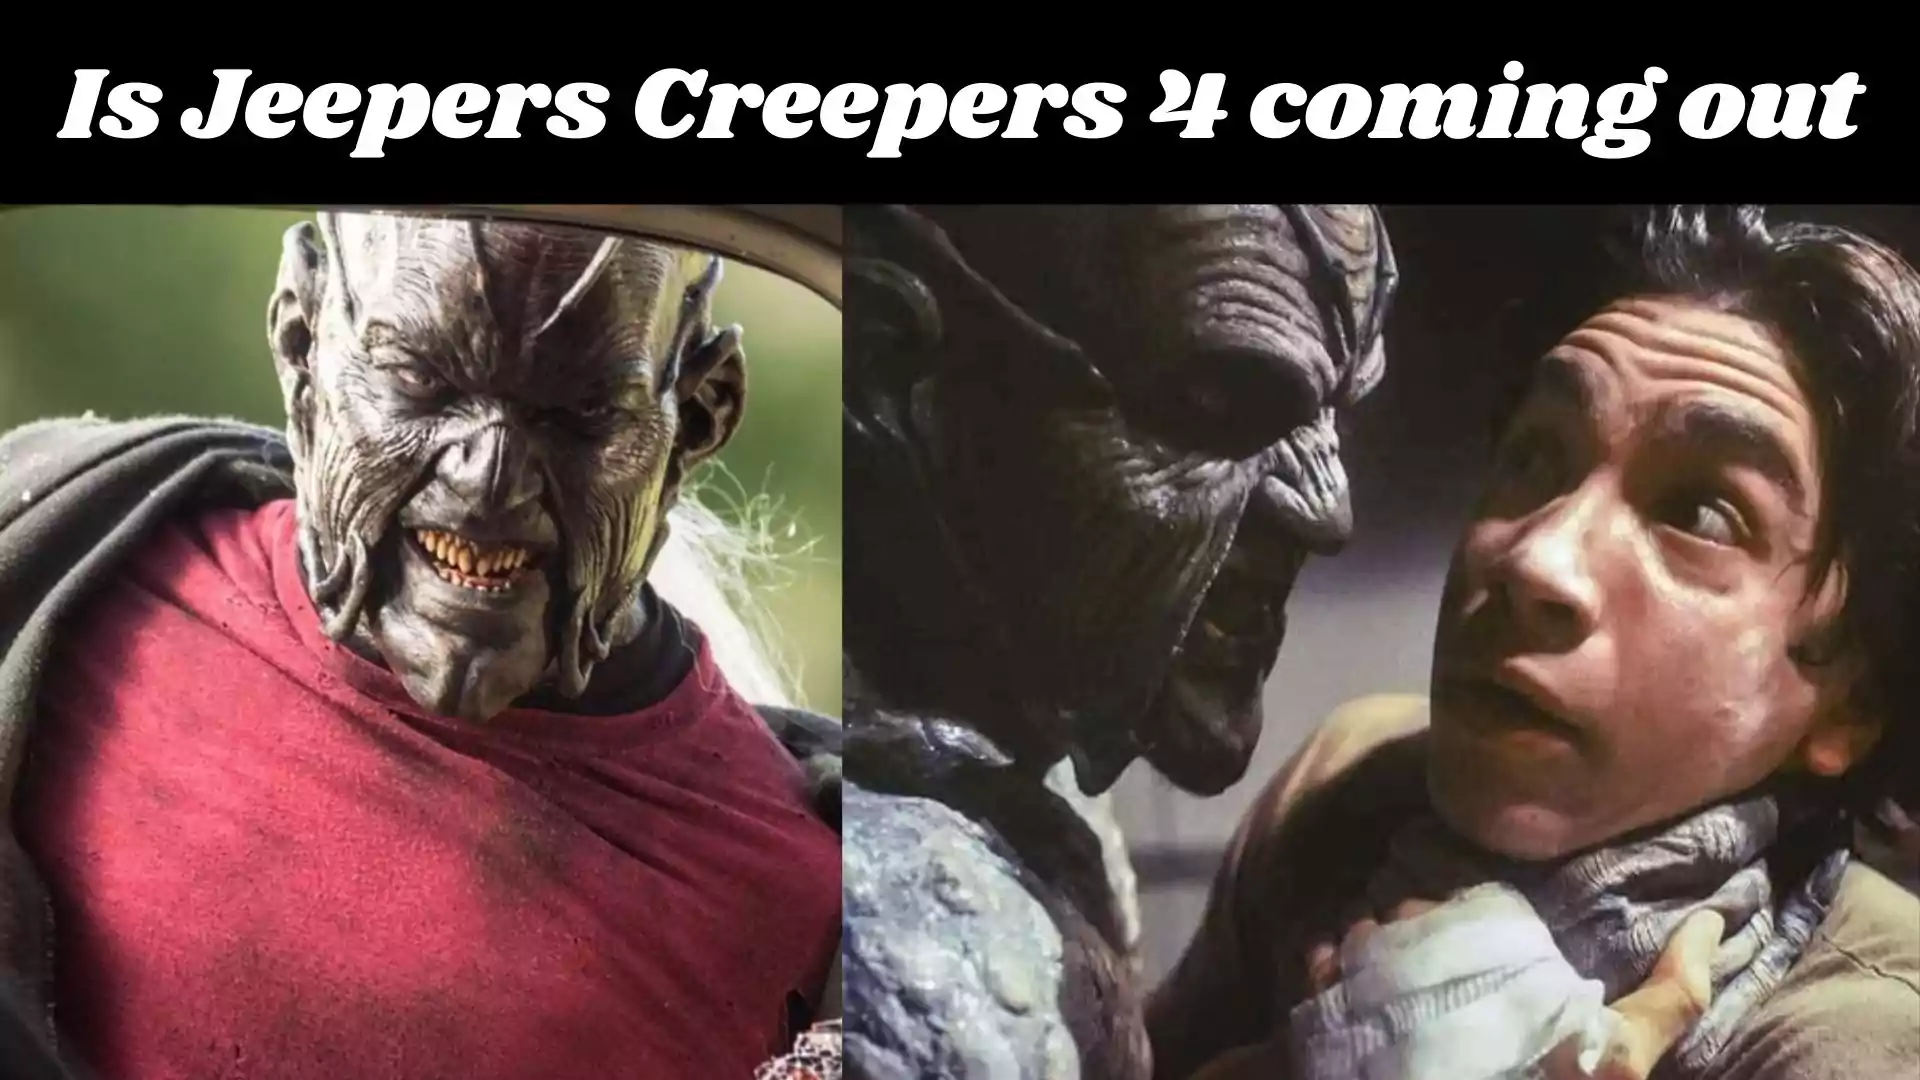 Is Jeepers Creepers 4 coming out wallpaper and images